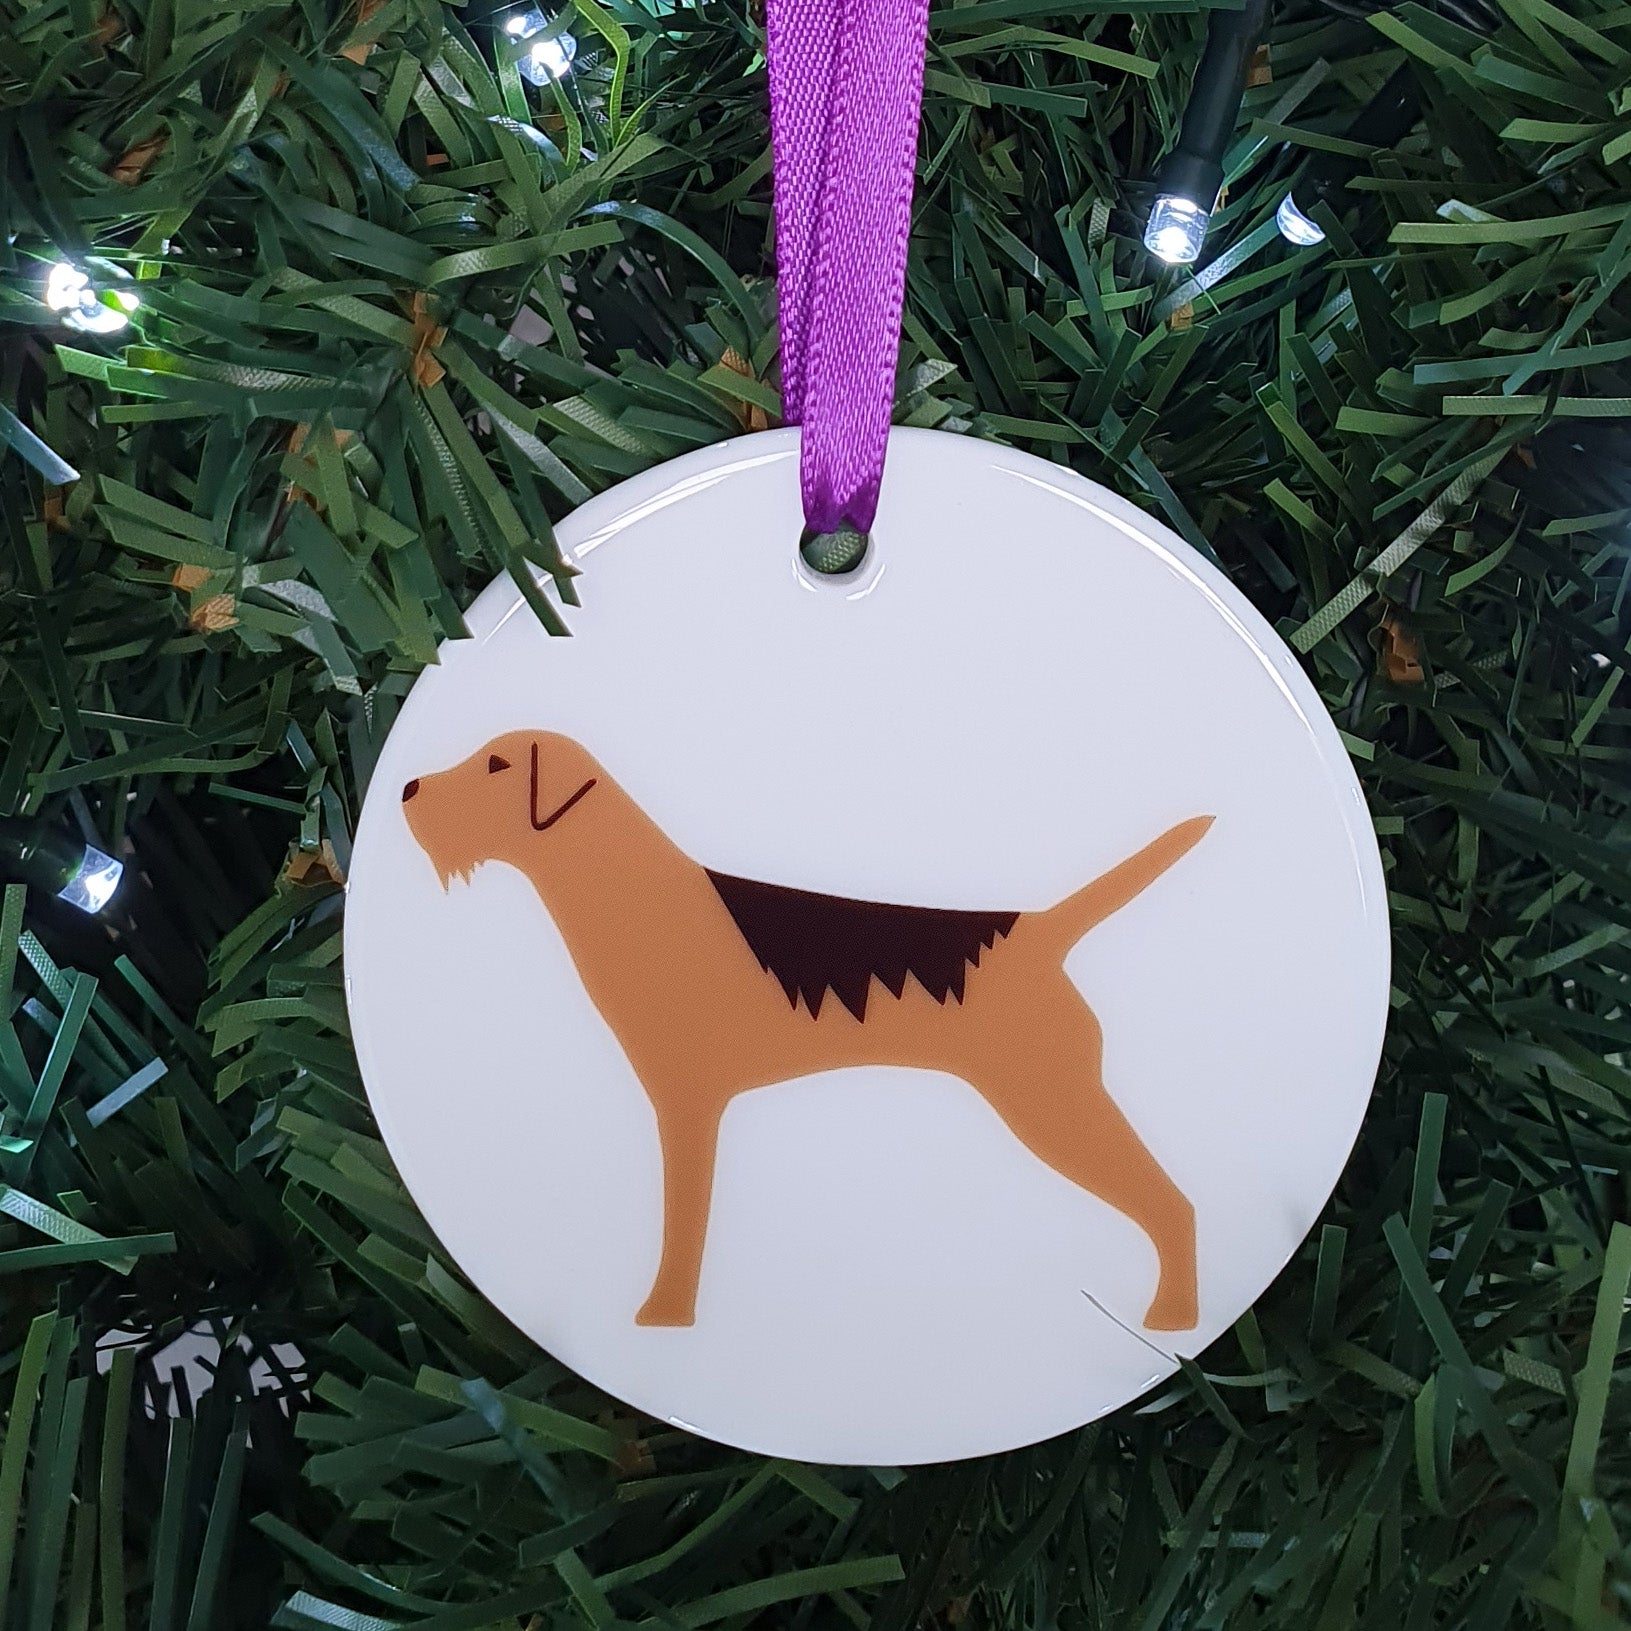 Border Terrier ceramic hanging decoration in Christmas tree